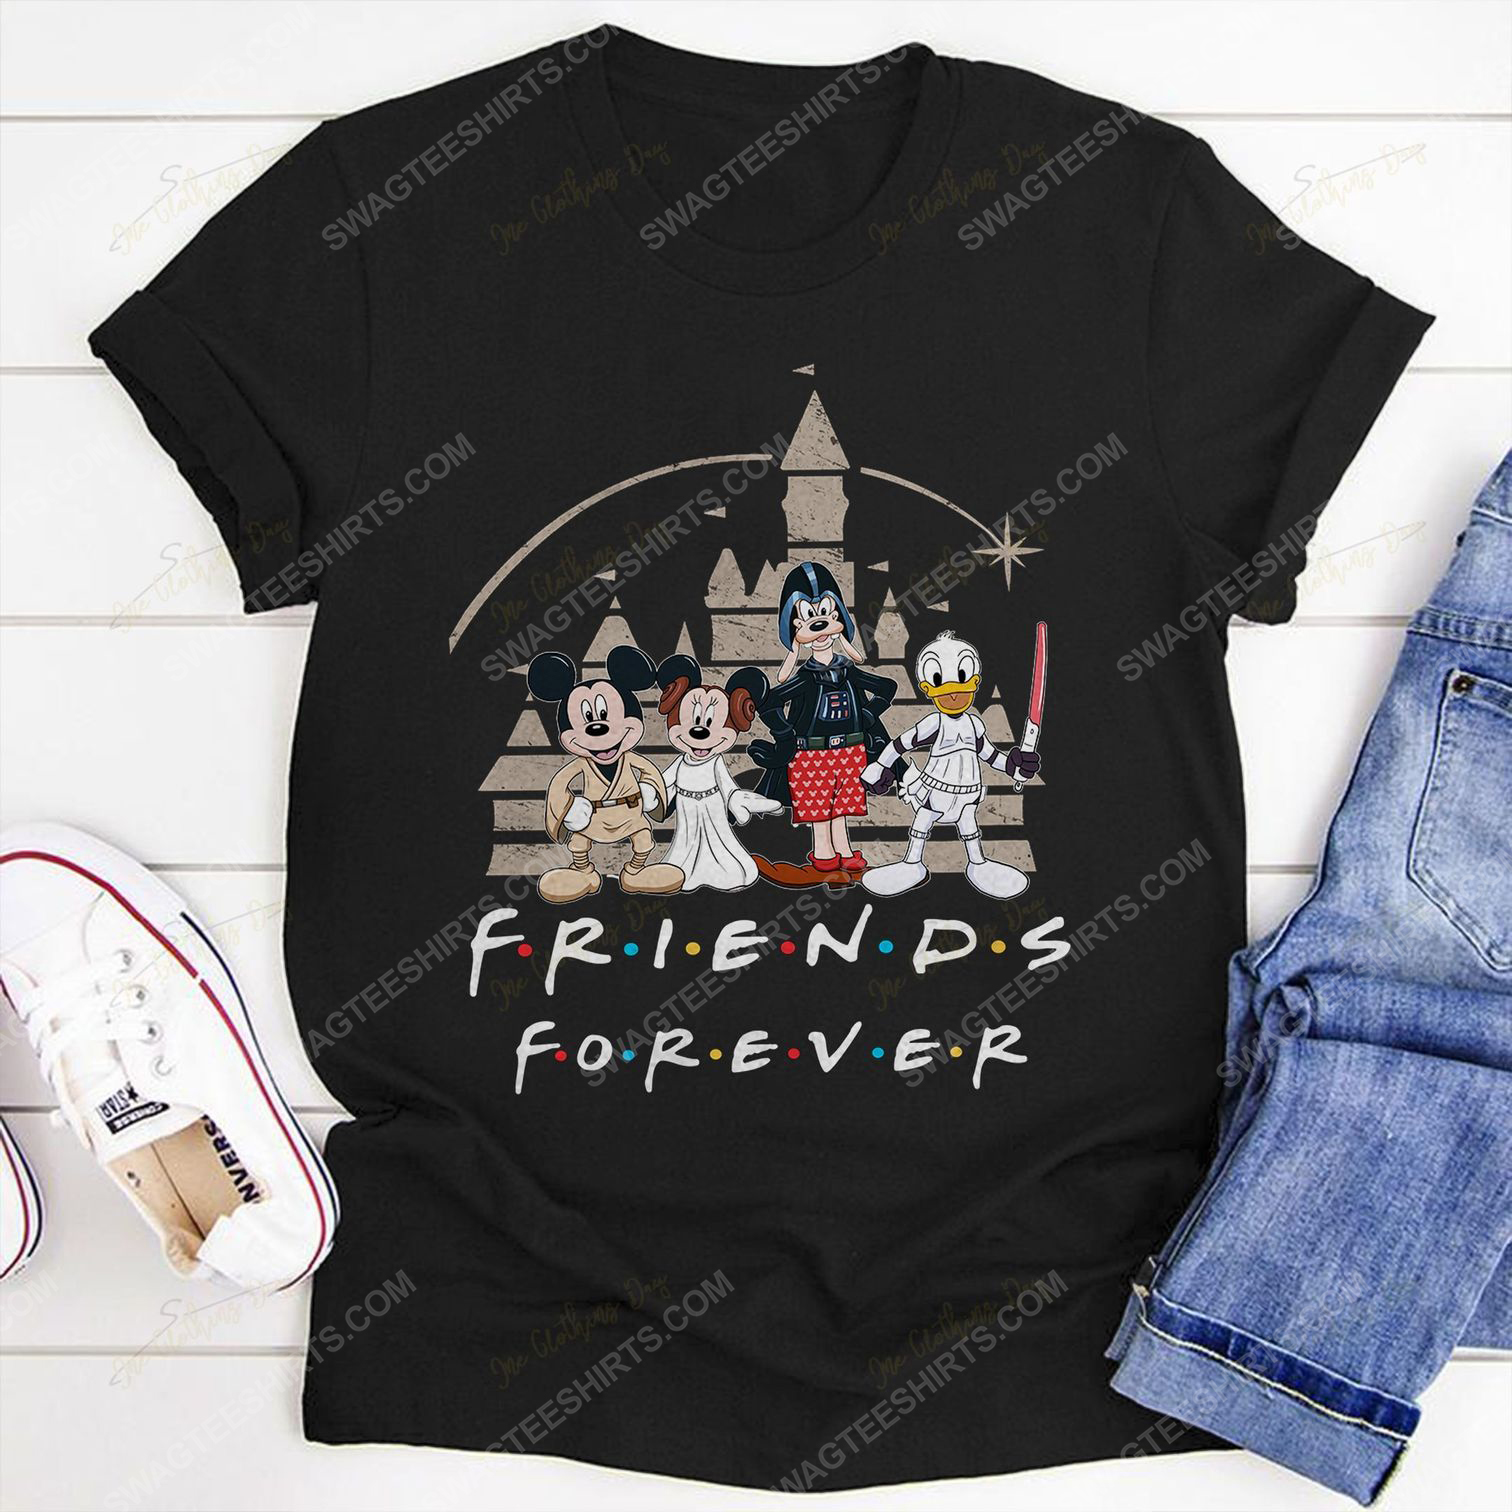 Friends tv show mickey mouse and friends shirt 2(1)